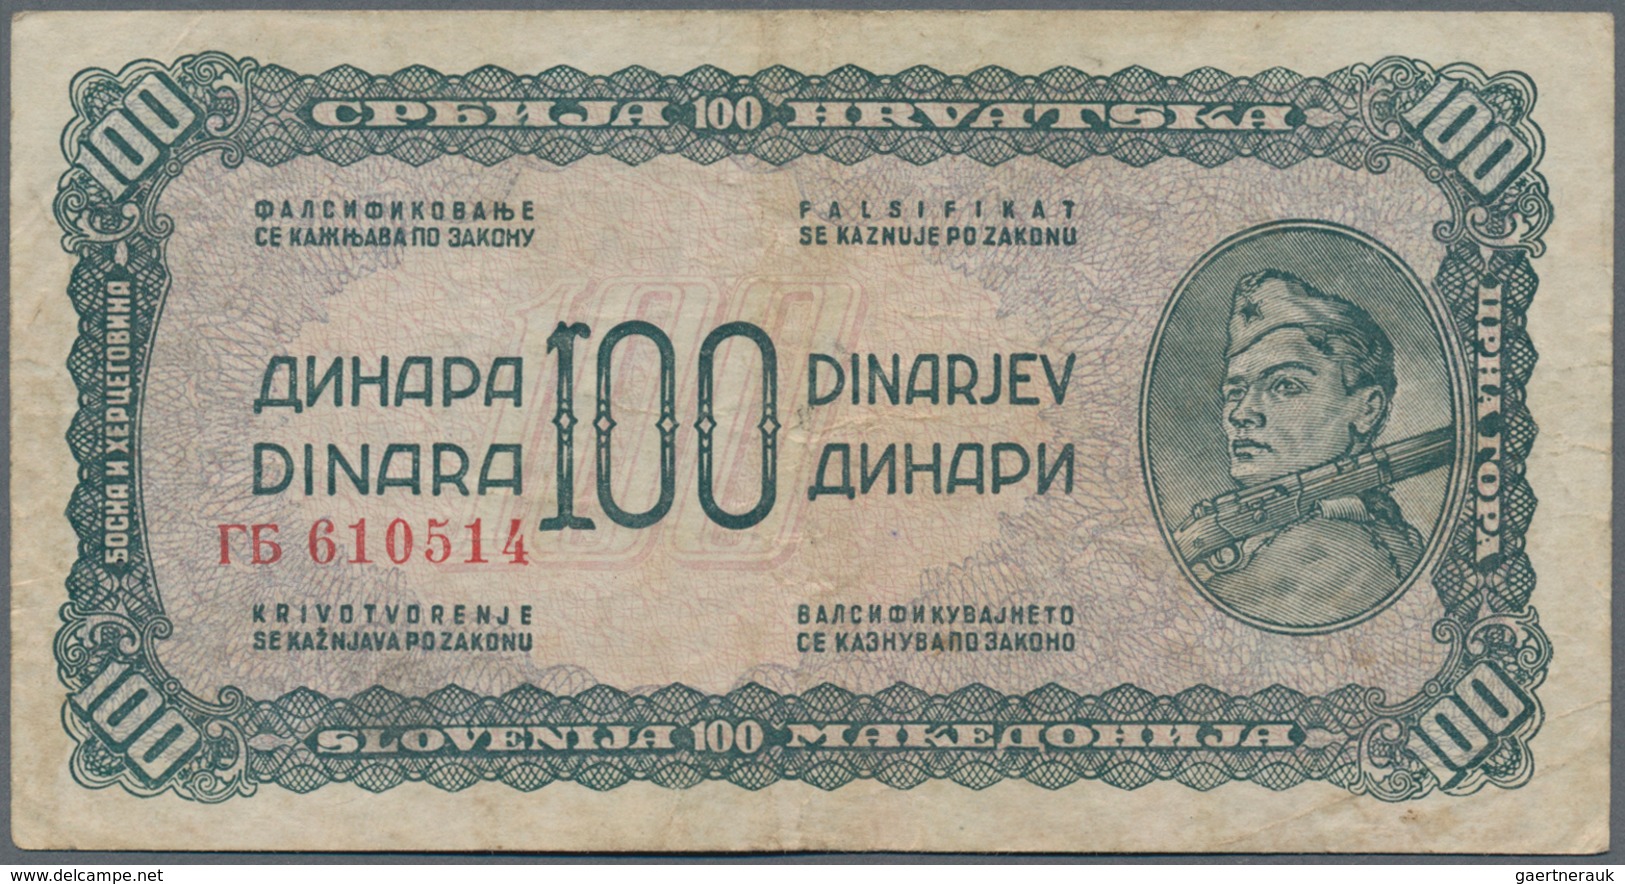 Yugoslavia / Jugoslavien: Nice set with 8 Banknotes of the 1944 "Partisan" issue with 1, 5, 2 x 10,